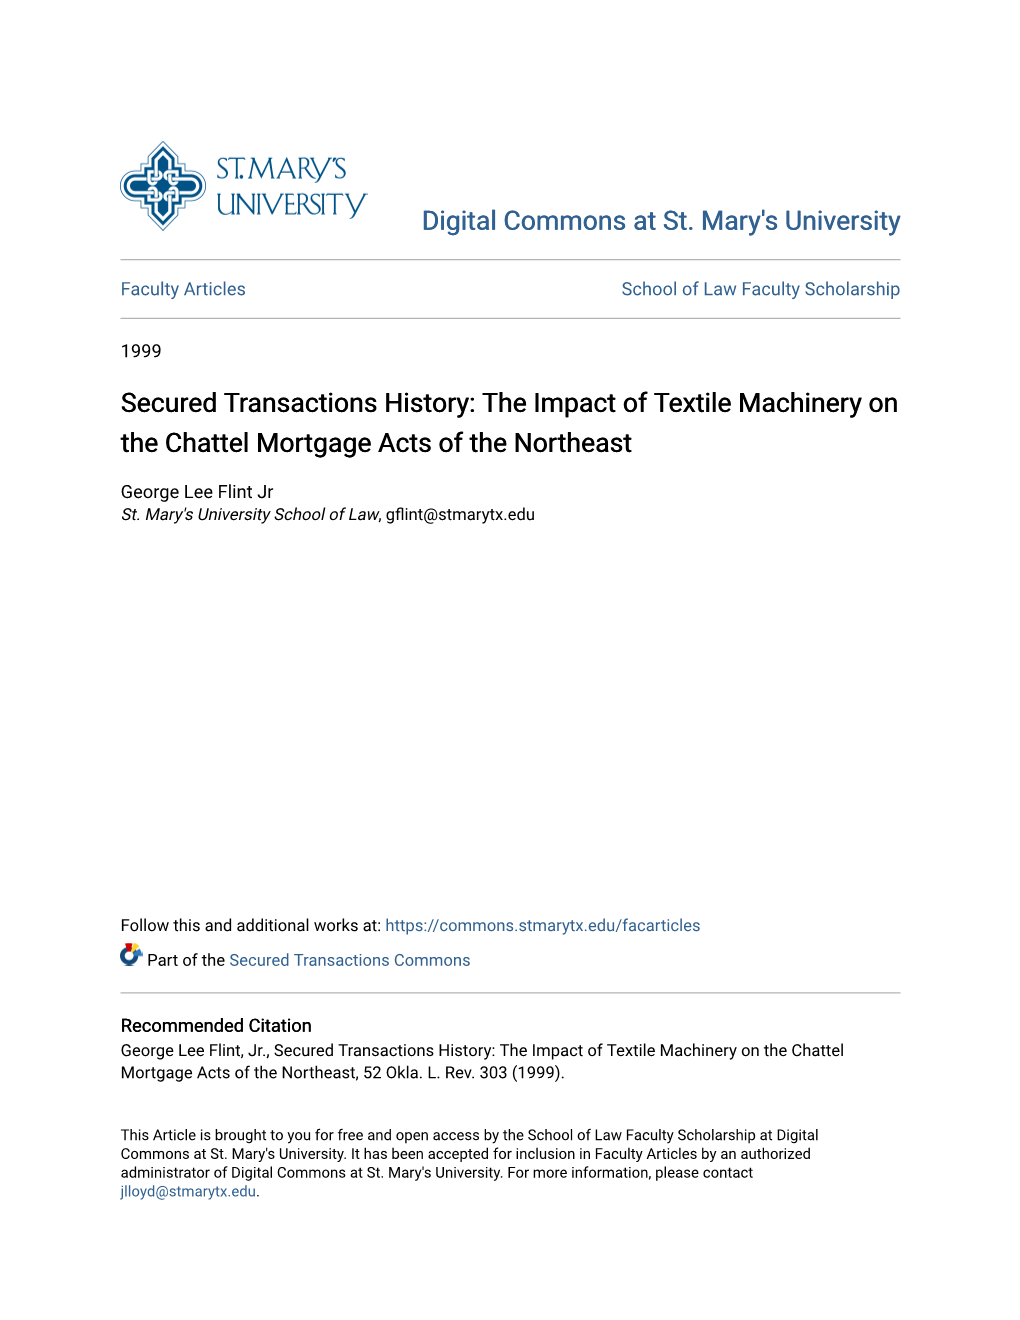 Secured Transactions History: the Impact of Textile Machinery on the Chattel Mortgage Acts of the Northeast